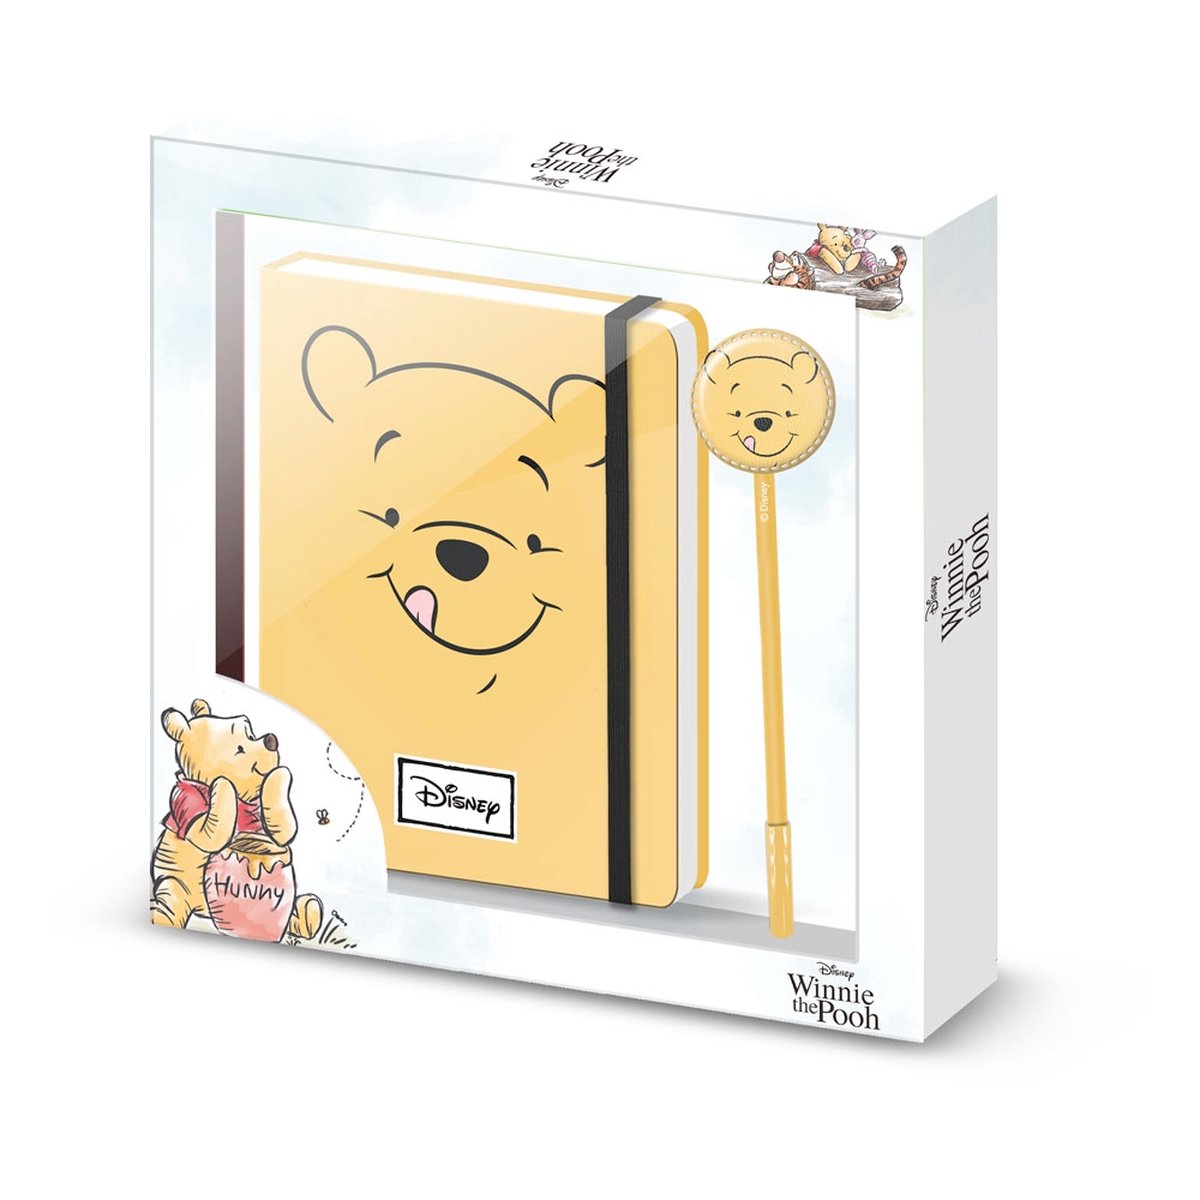 Karactermania Winnie The Pooh Notitieboek Notebook with Pen Gift Set Face Multicolours